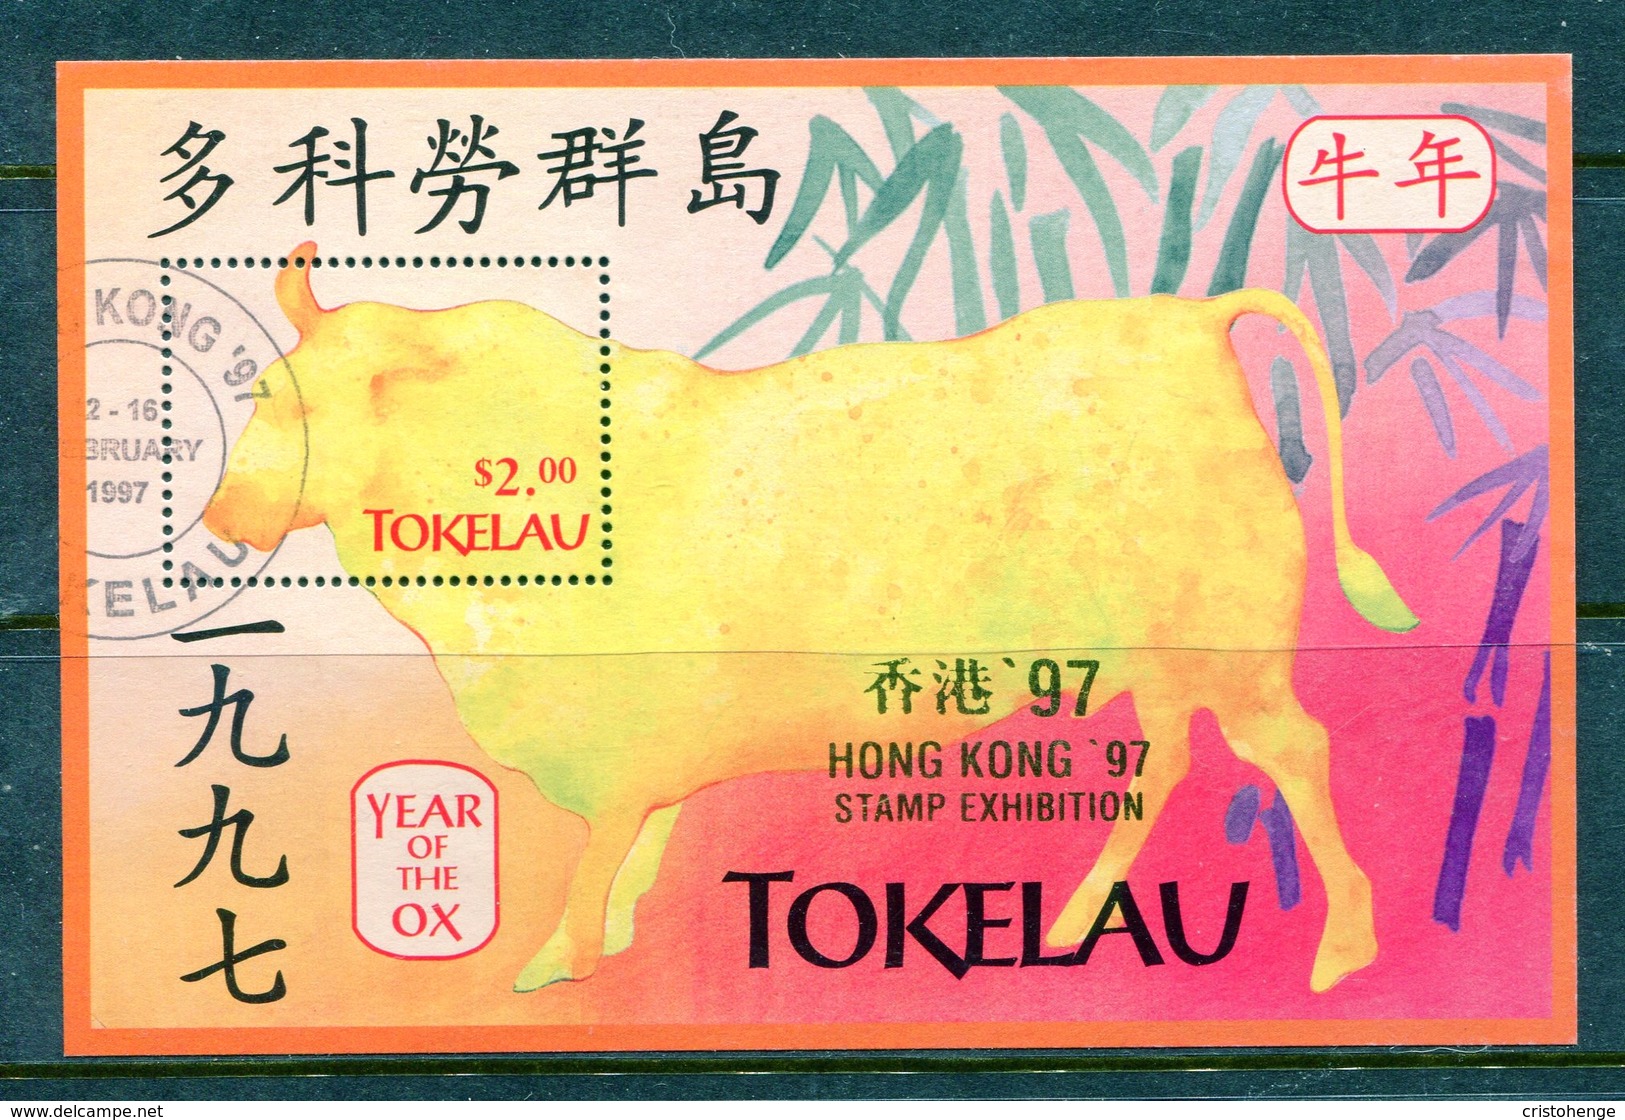 Tokelau 1997 Hong Kong '97 Stamp Exhibition - Chinese New Year - Year Of The Ox MS Used (SG MS257) - Tokelau